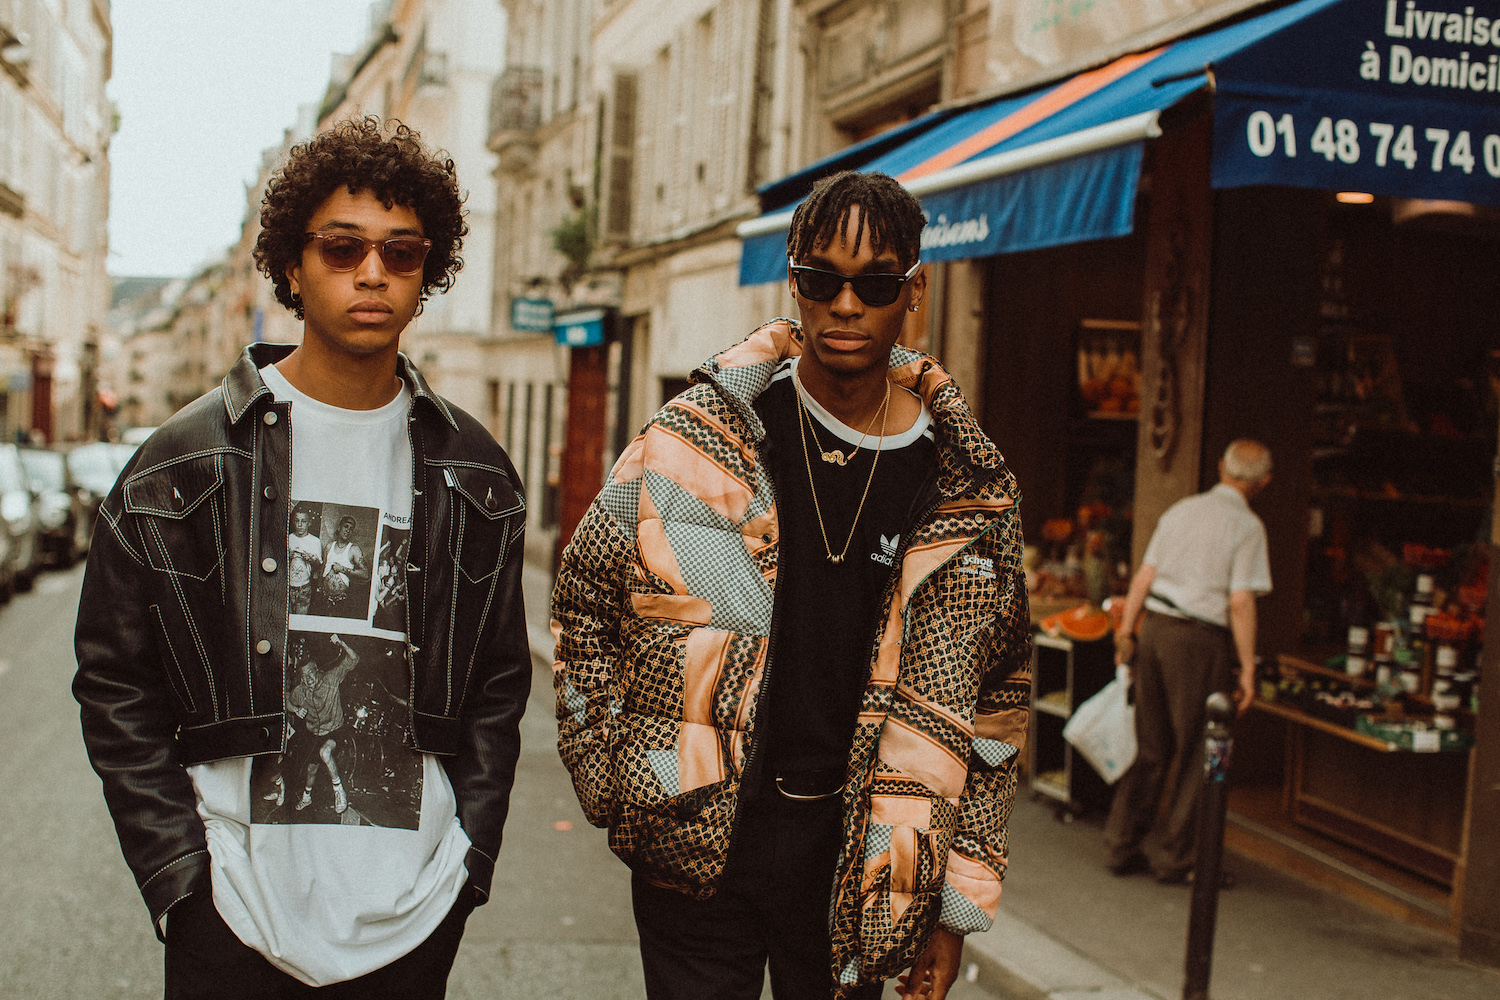 Ray-Ban Set to Drop Carnaby Street Exclusive and launches Ray-Ban Studios Collab Featuring the Martinez Brothers